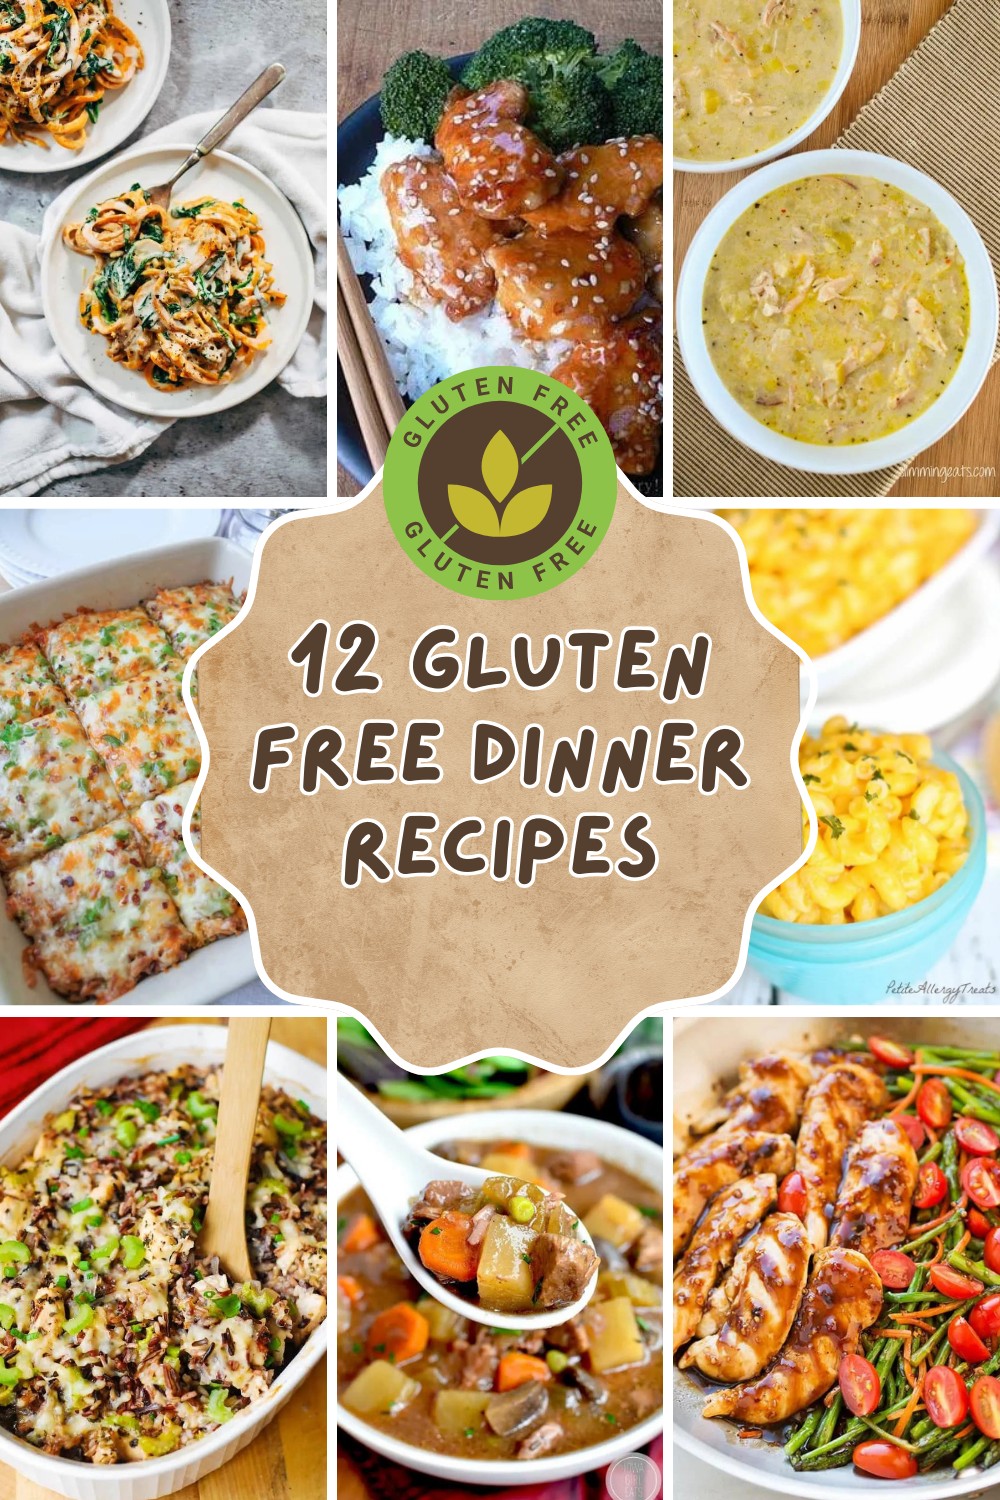 Struggling with a gluten-free diet when your family loves pizza and lasagna? No worries! We've gathered 12 delicious and easy gluten-free dinner recipes that the whole family will adore. No need to cook separate meals! 🌾🍛🍕 #GlutenFreeLiving #FamilyFavorites #EasyDinners







